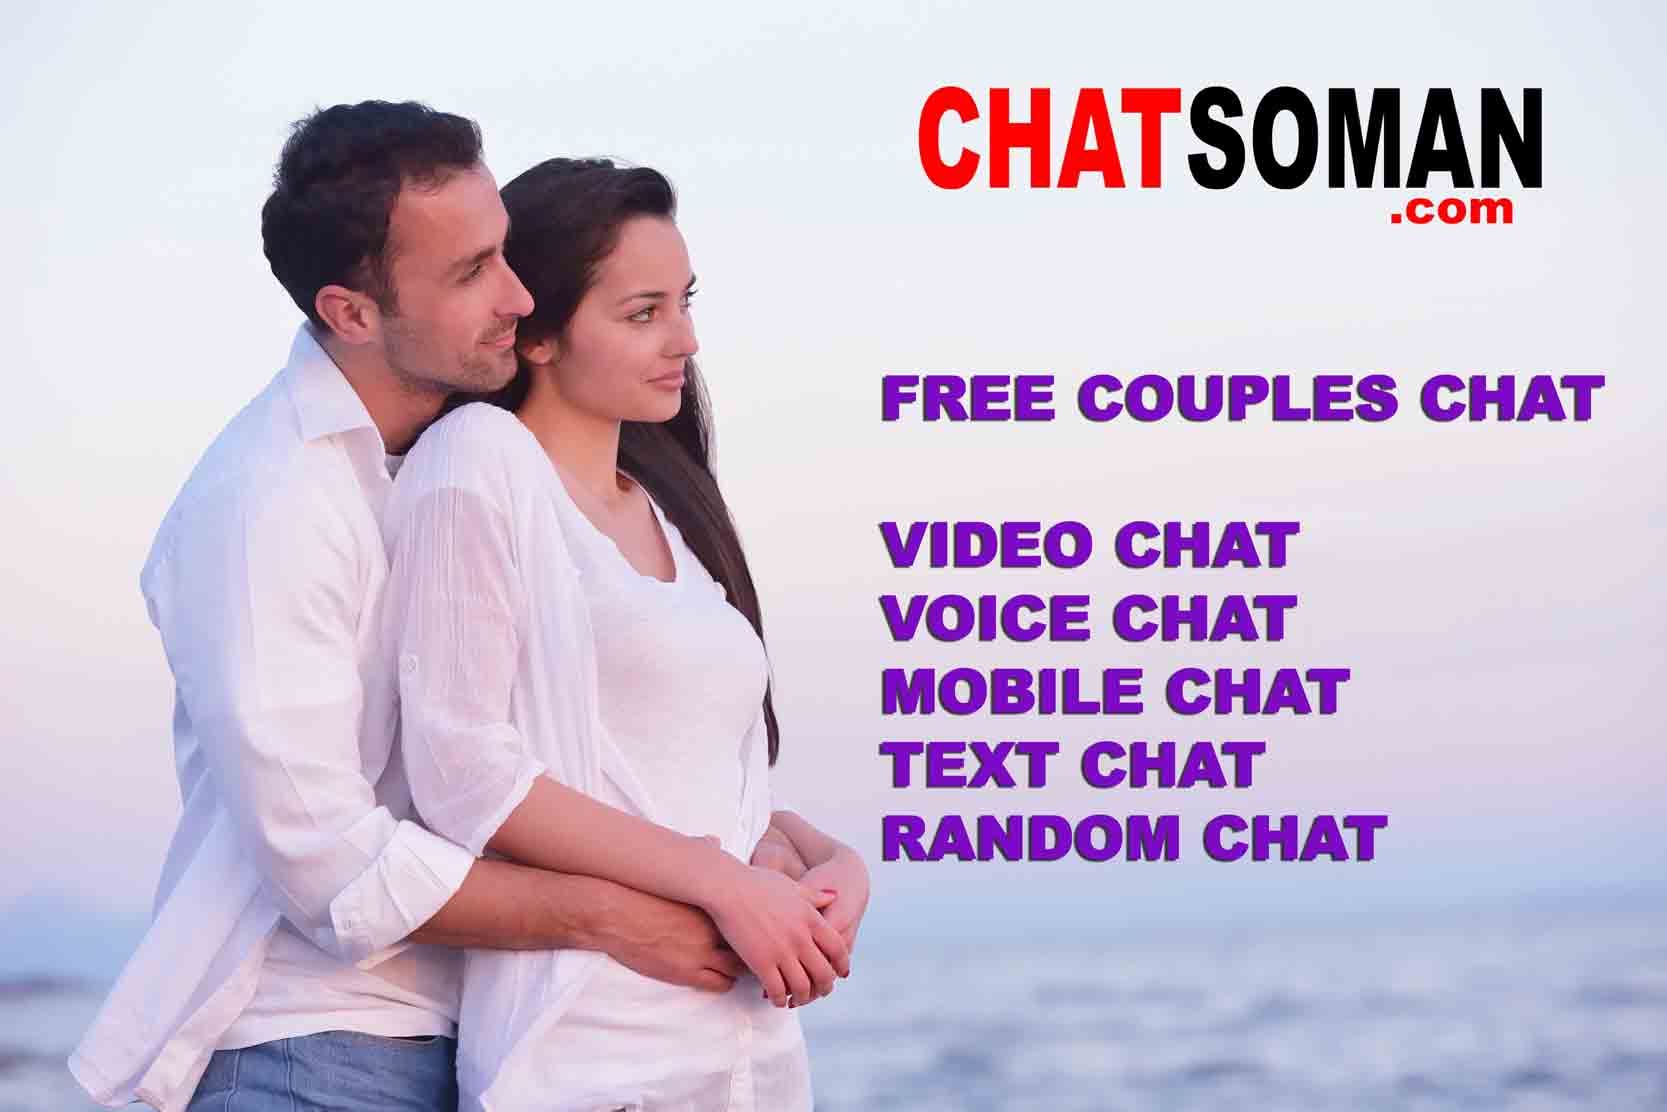 Video chat online room